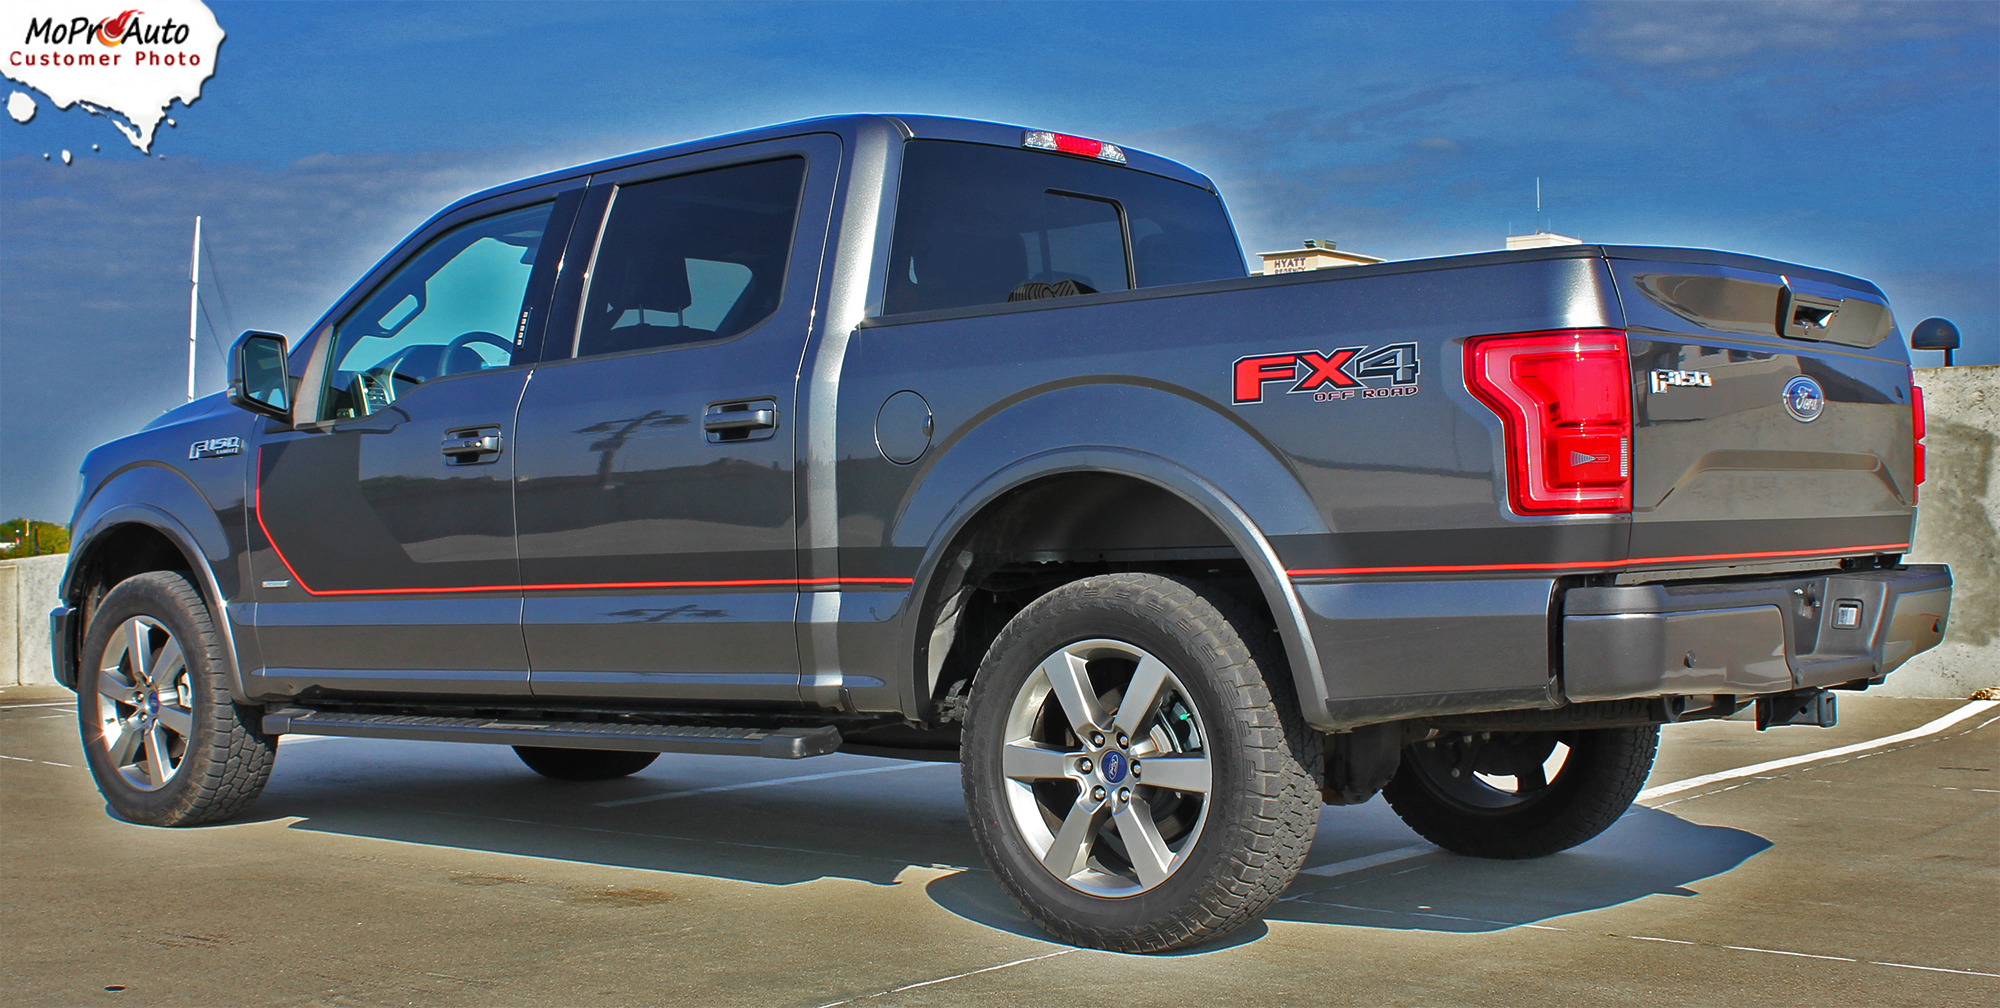 2015, 2016, 2017, 2018, 2019, 2020 Sideline Special Edition Ford F-Series F-150 Door Hockey Stick Appearance Package Vinyl Graphics and Decals Kit by MoProAuto Pro Design Series